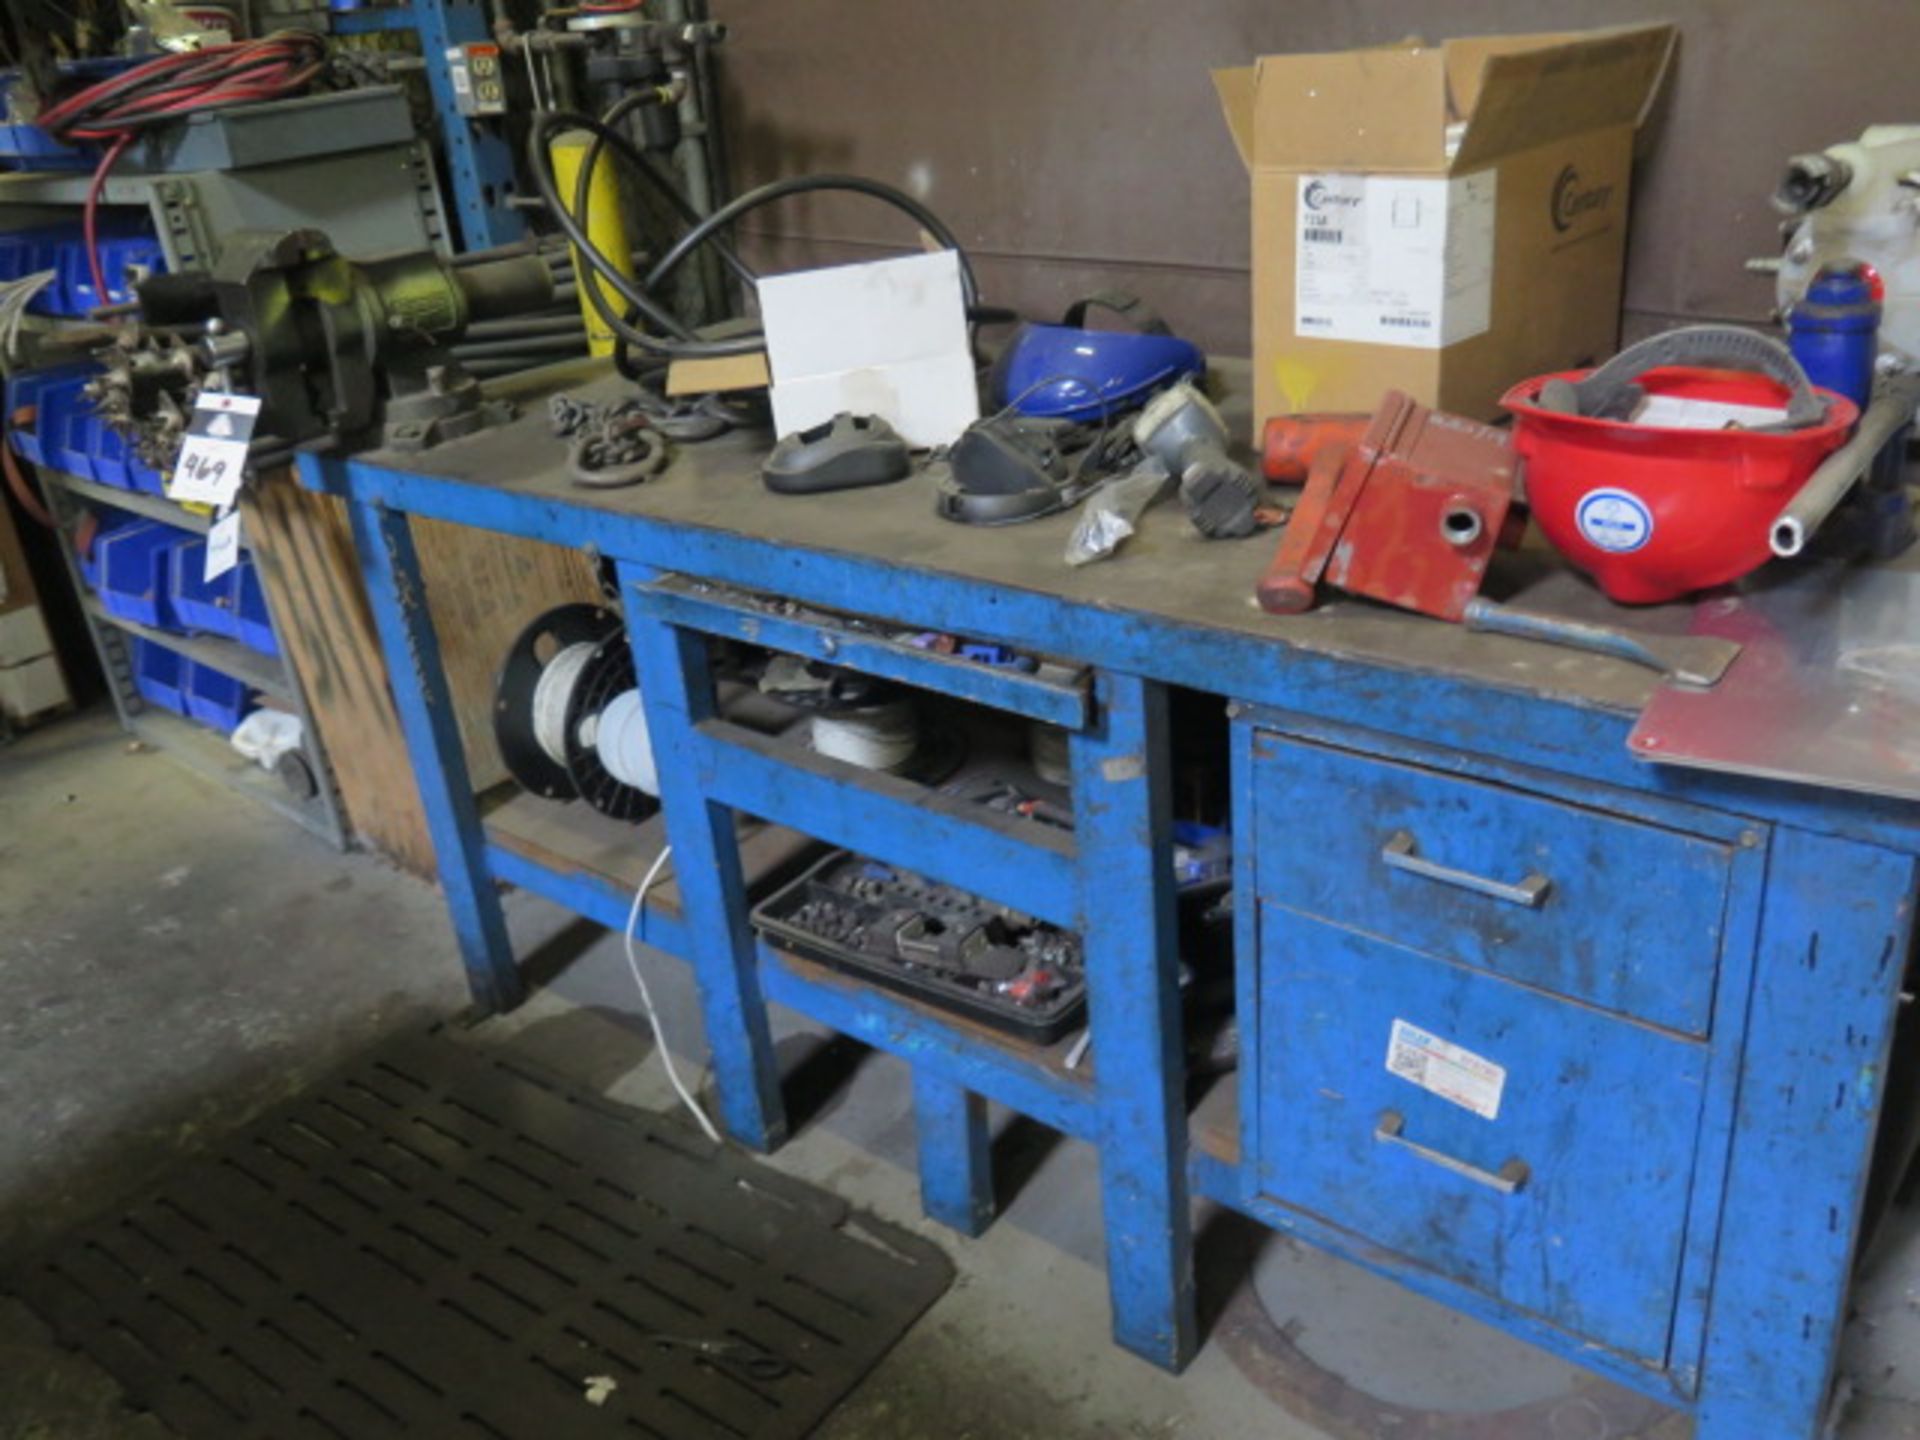 Heater Elements and Supplies, 5" Bench Vise w/ Steel Work Bench and Misc (SOLD AS-IS - NO WARRANTY) - Image 7 of 8